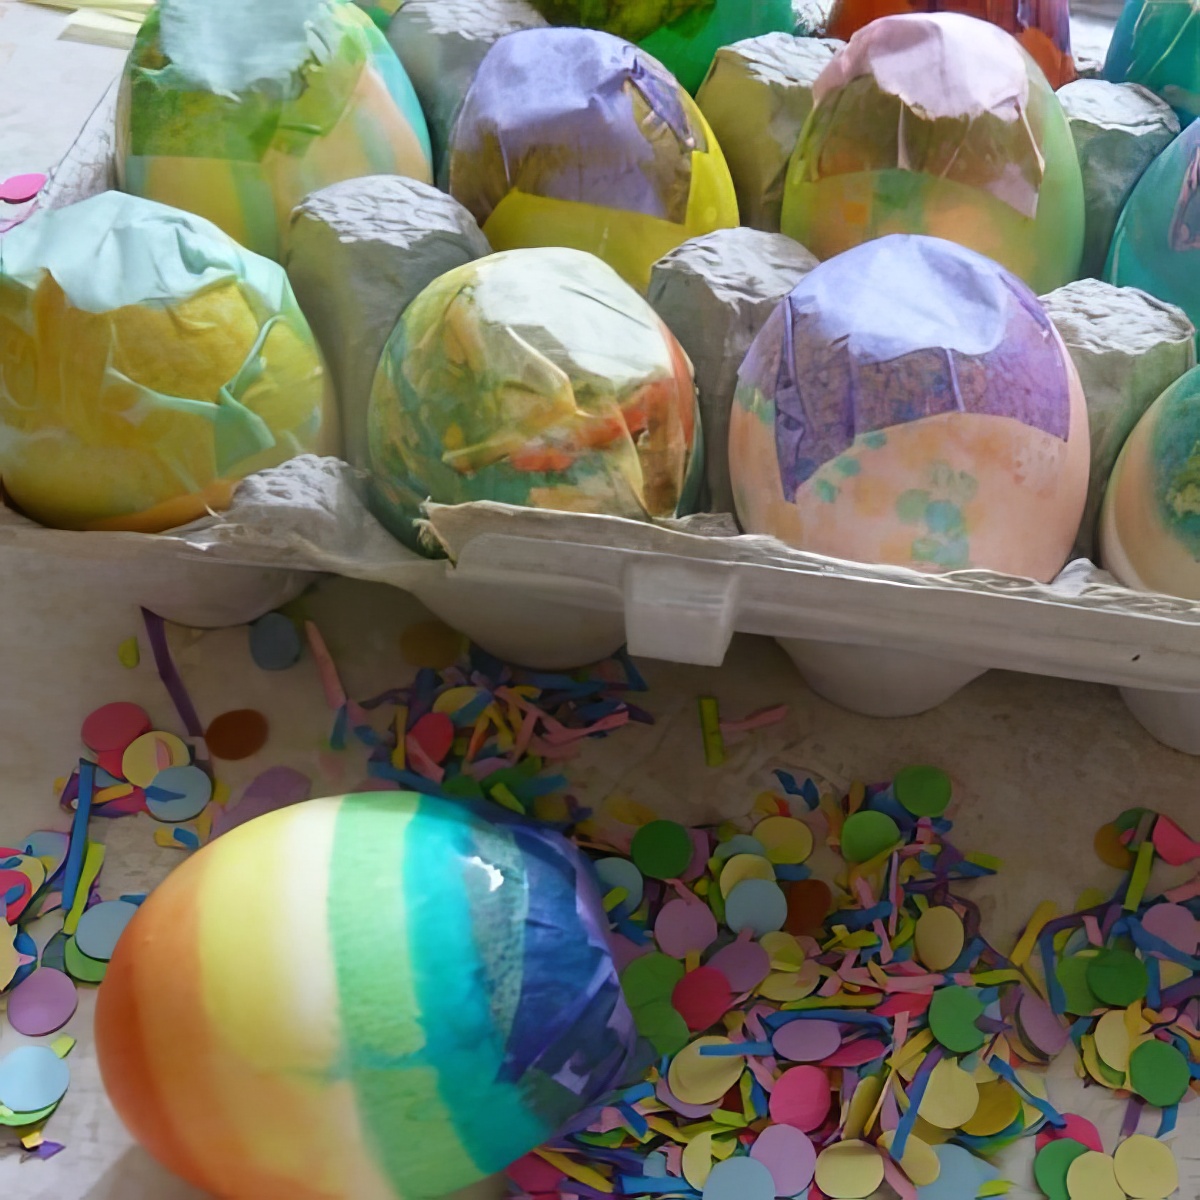 Get dirty yet having fun by putting some confetti to those Eggs for the Easter egg hunt!